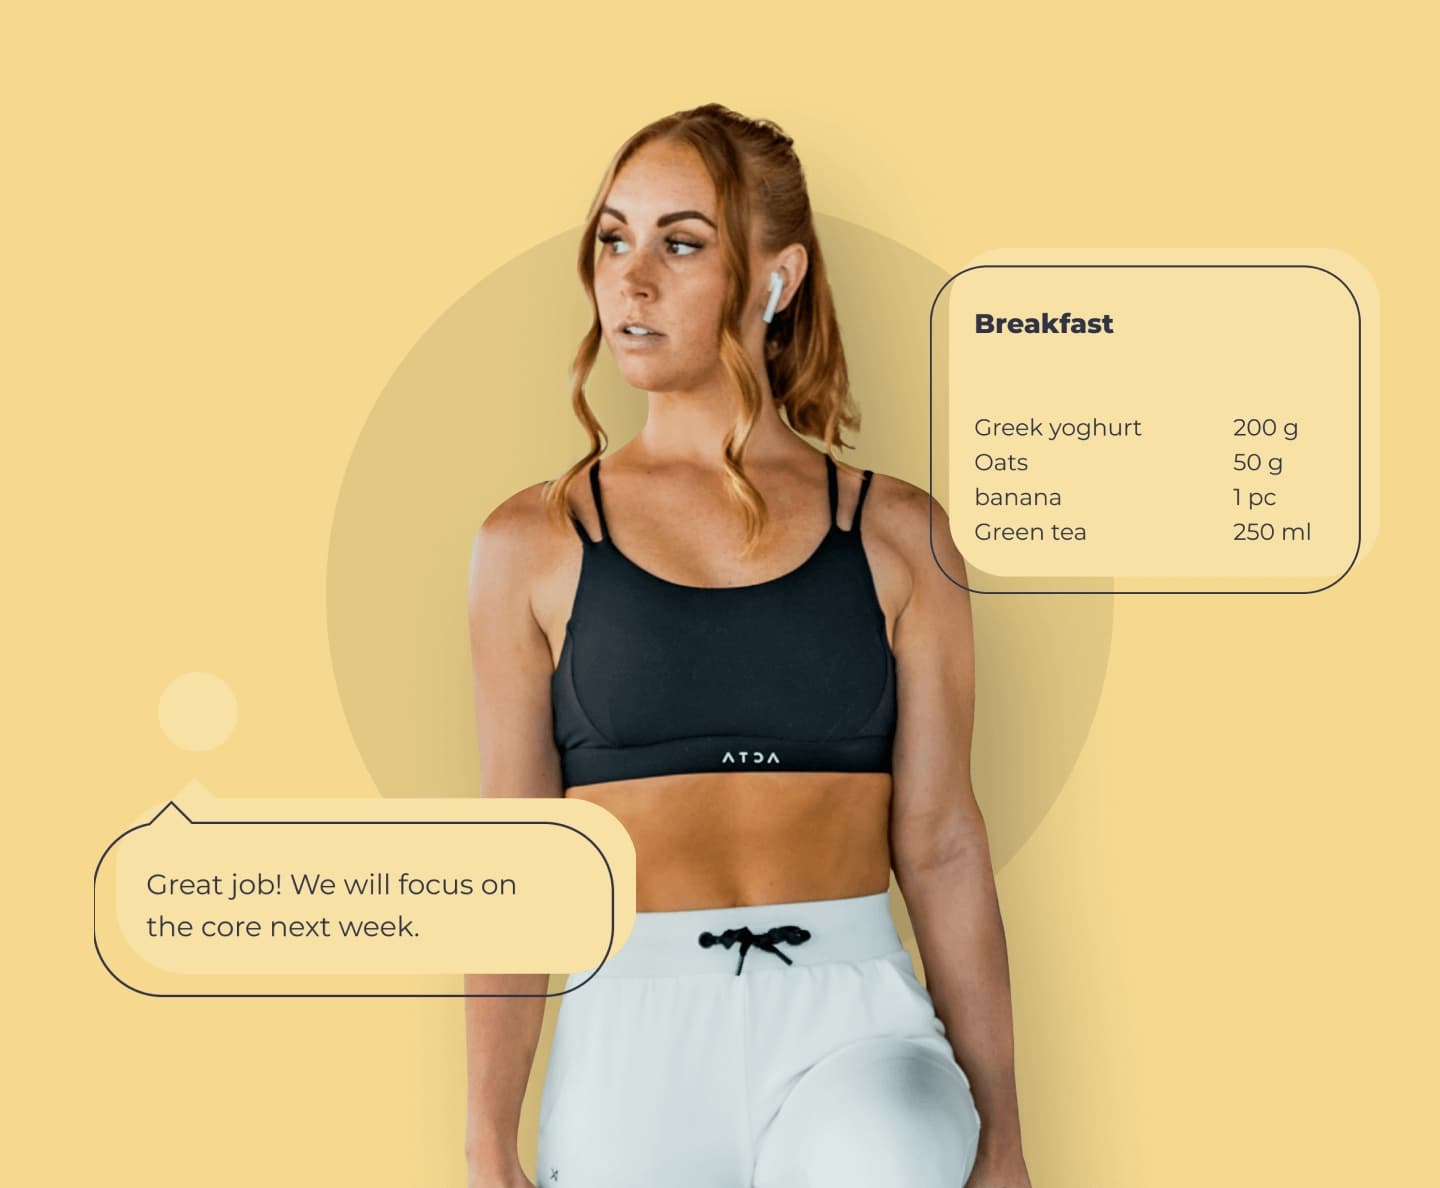 Strong Beauty - Web Application for Girls Who Love Movement and Fitness